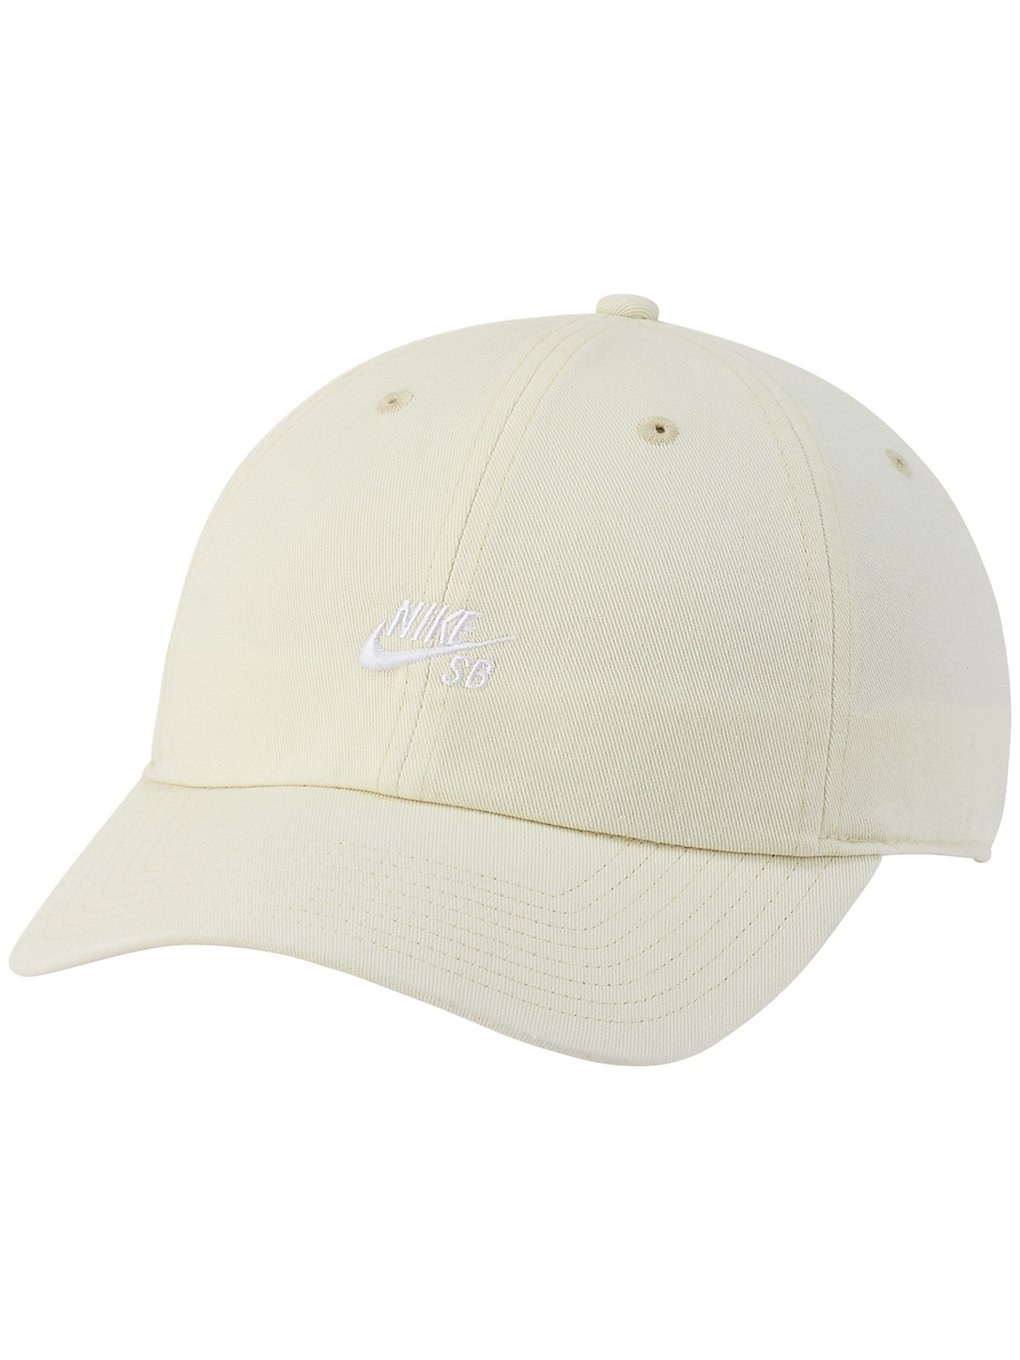 Nike H86 Washed Cap coconut milk/white